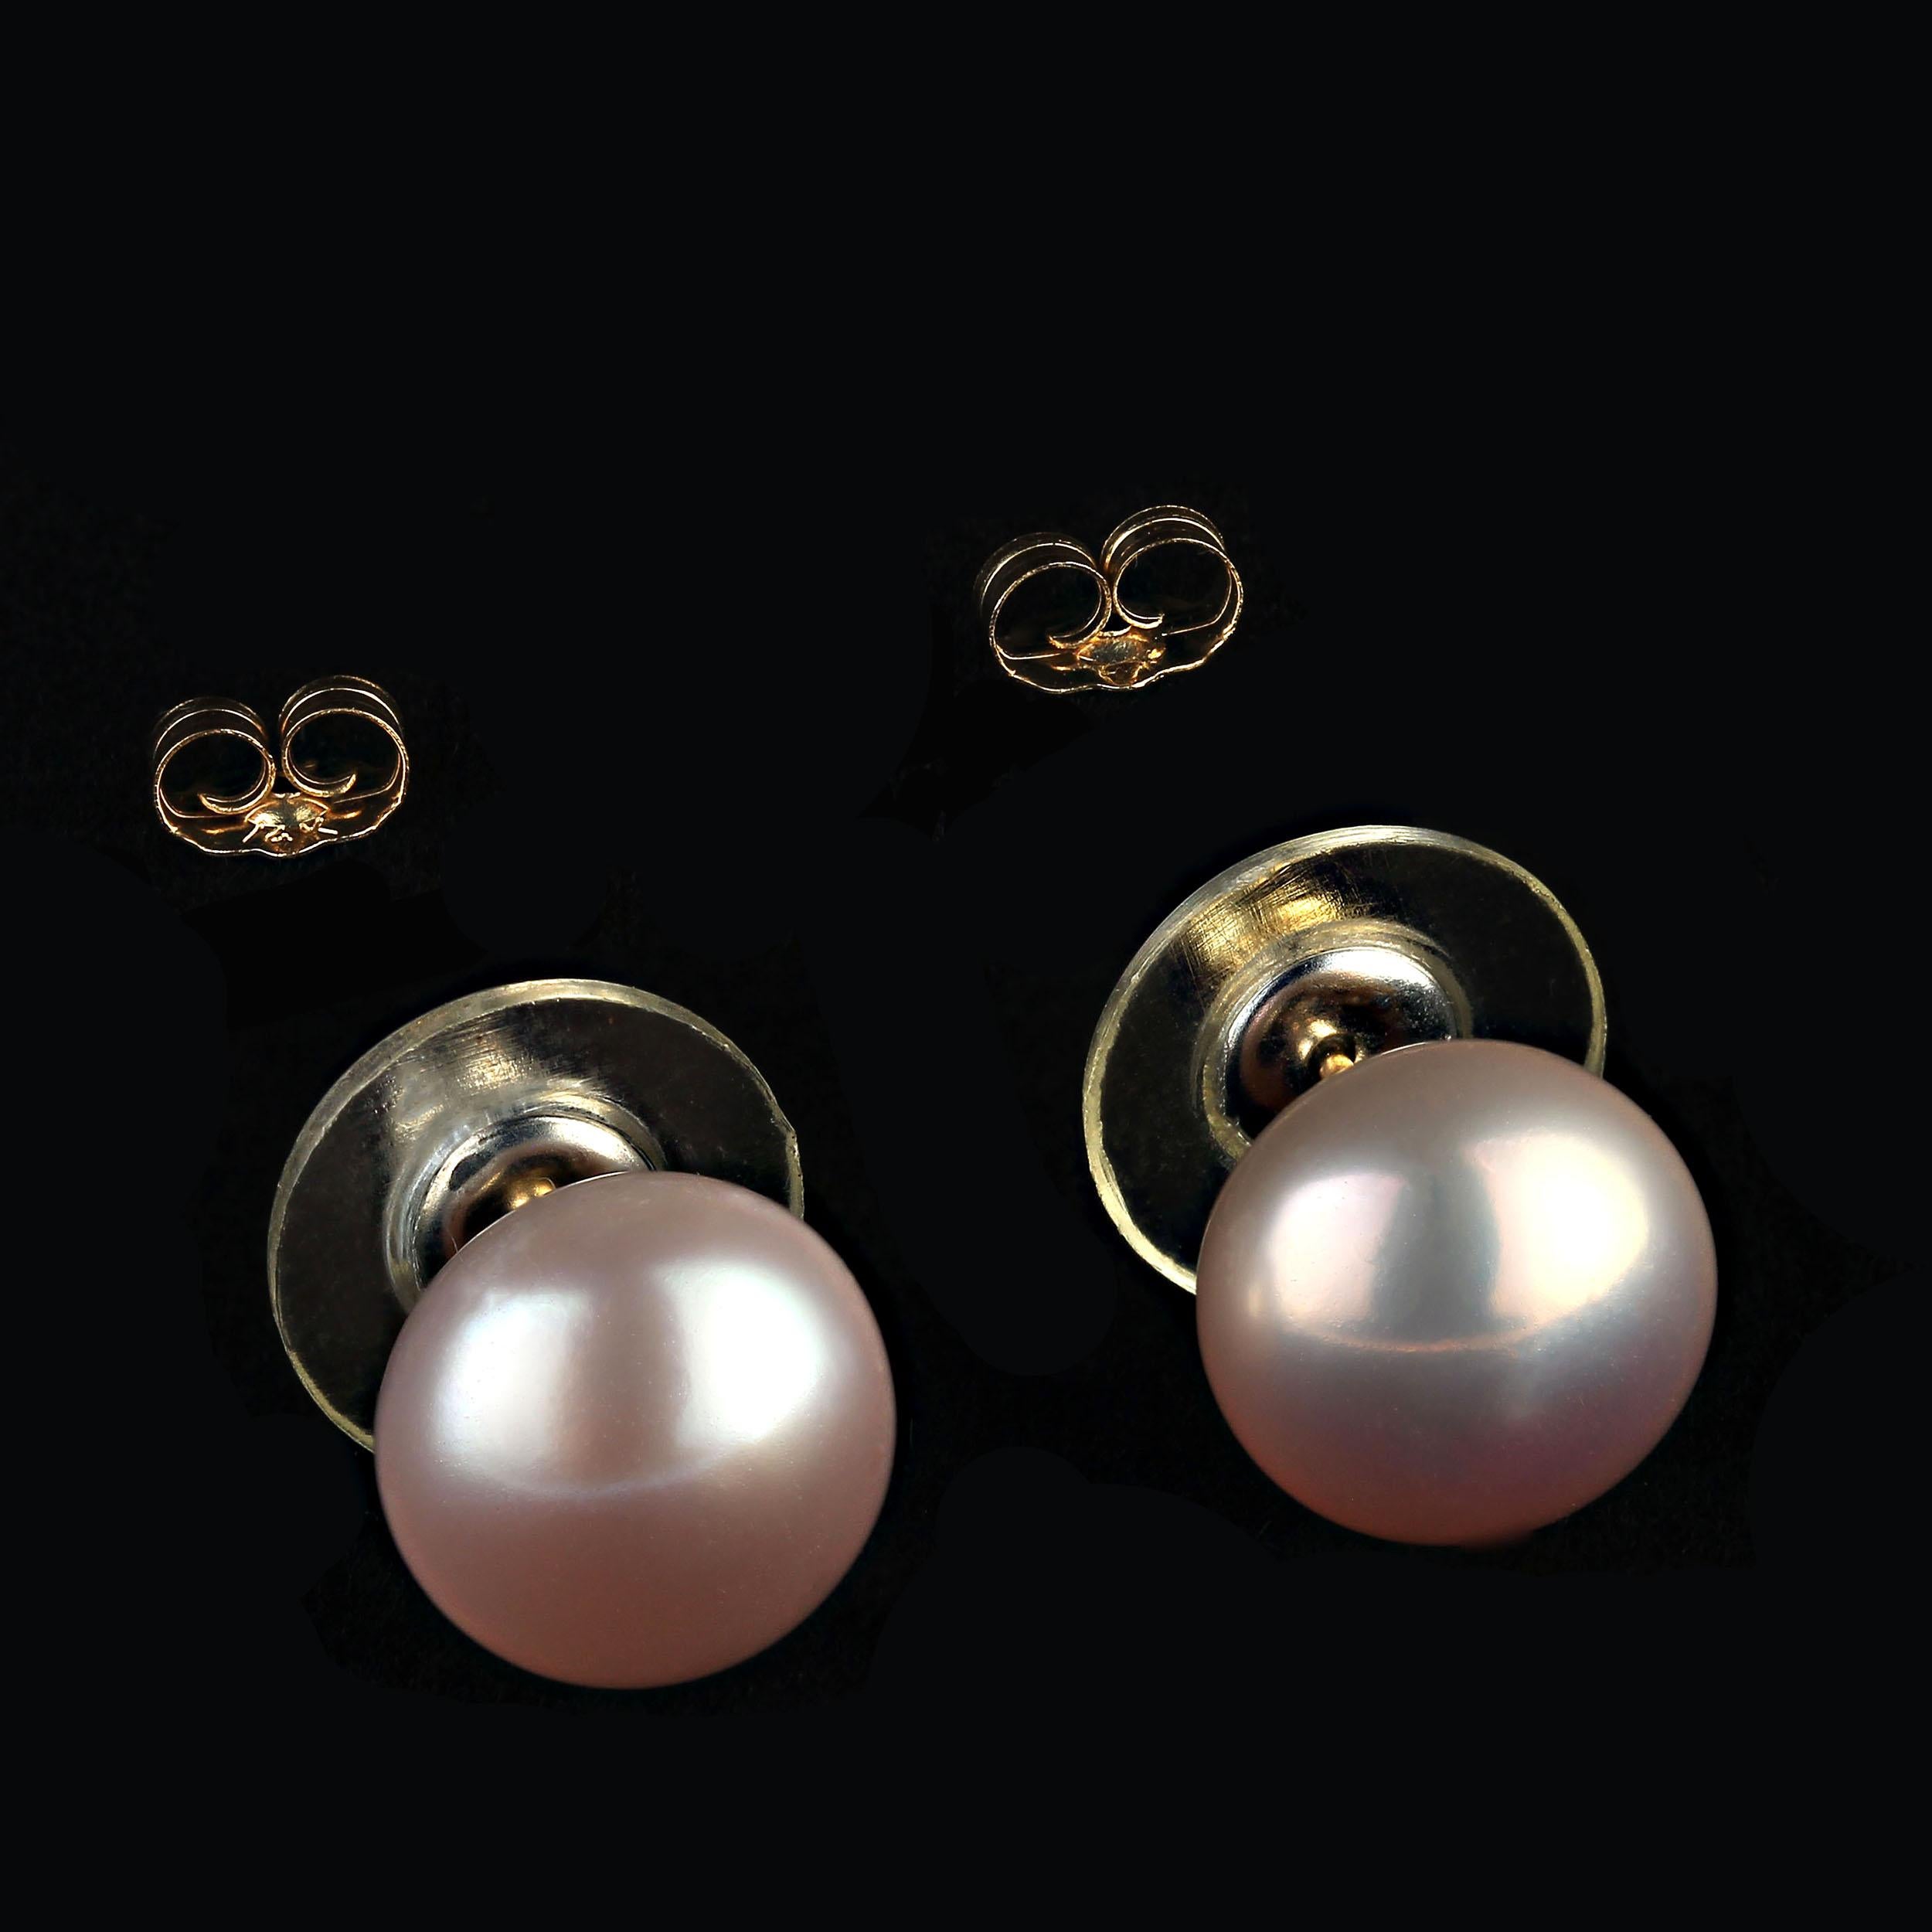 Bead AJD Stunning 10.5MM Pink Pearl Studs with 14K yellow gold posts